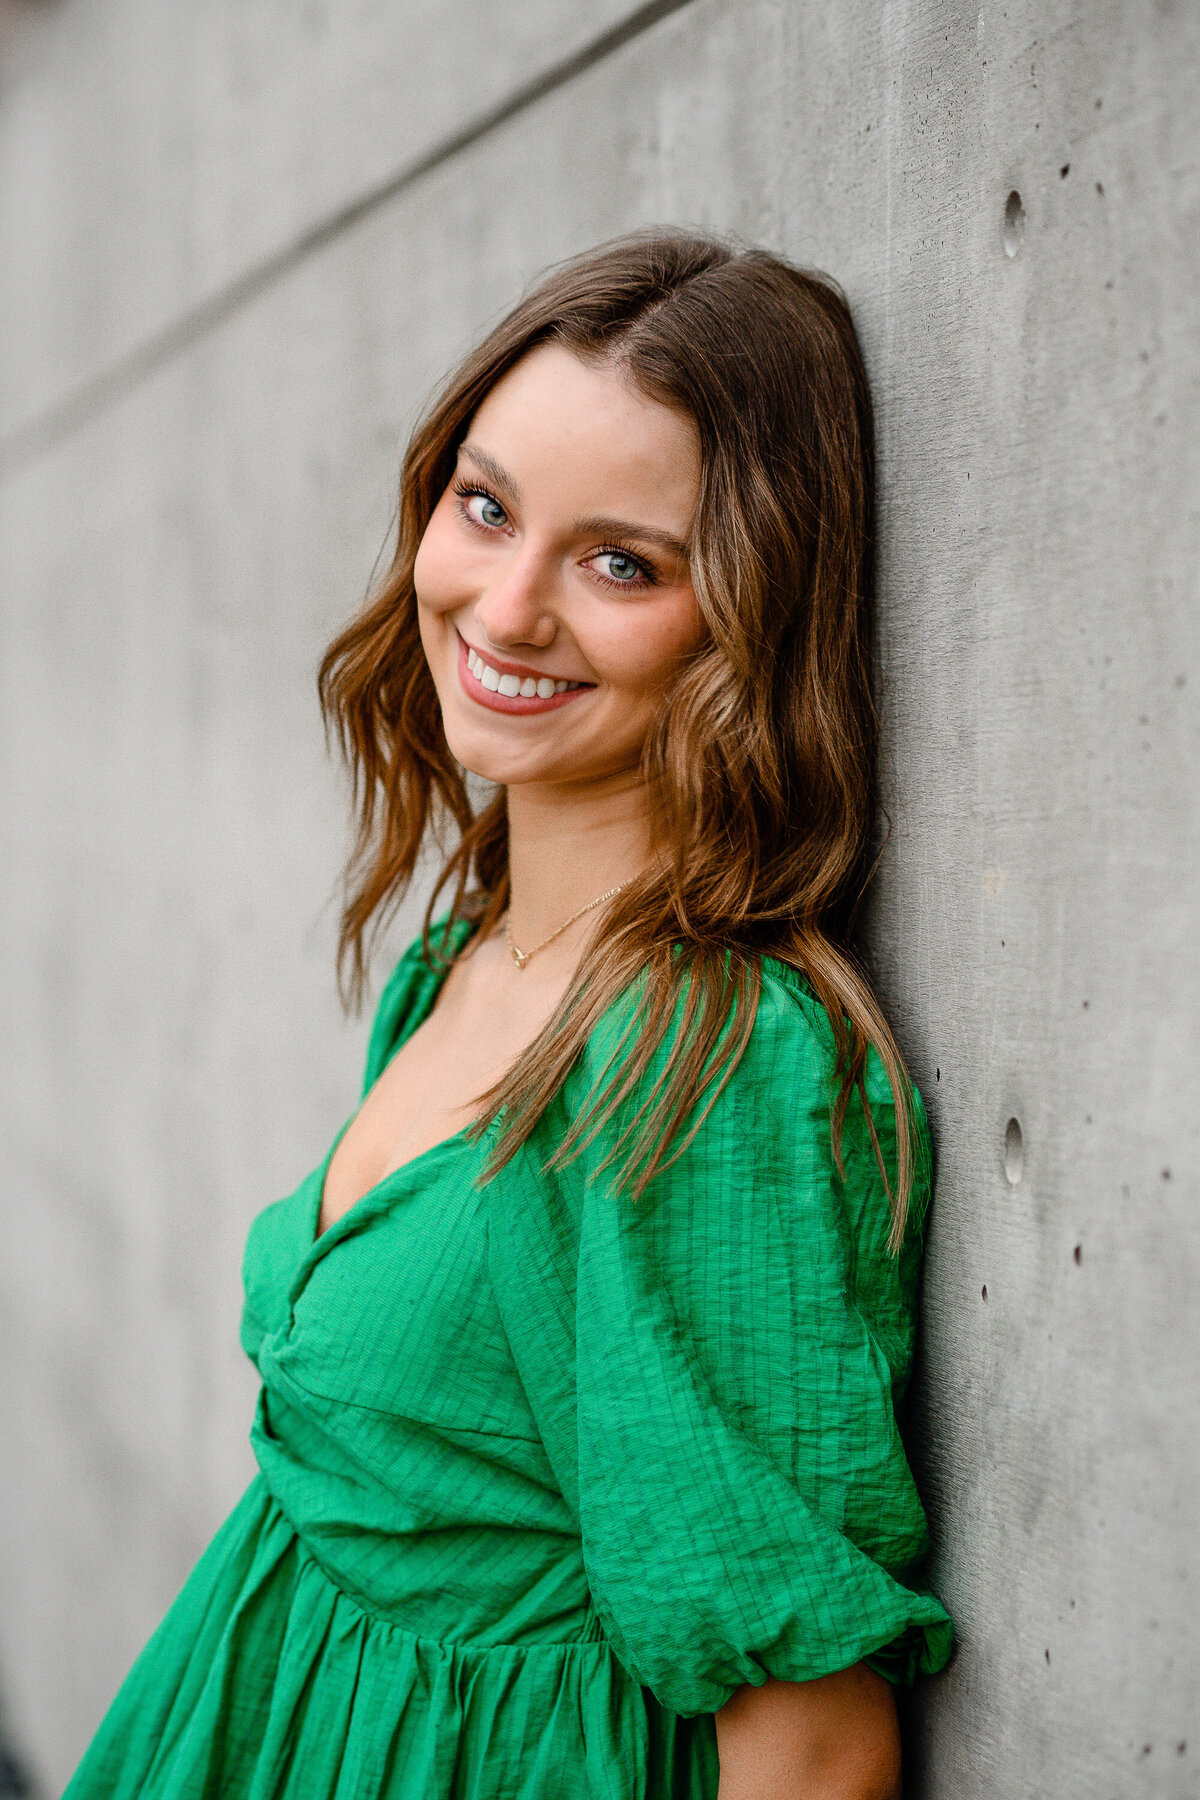 senior photo outfits with girl ina. green dress smiling over her shoulder as she leans against a concrete wall for her senior photos